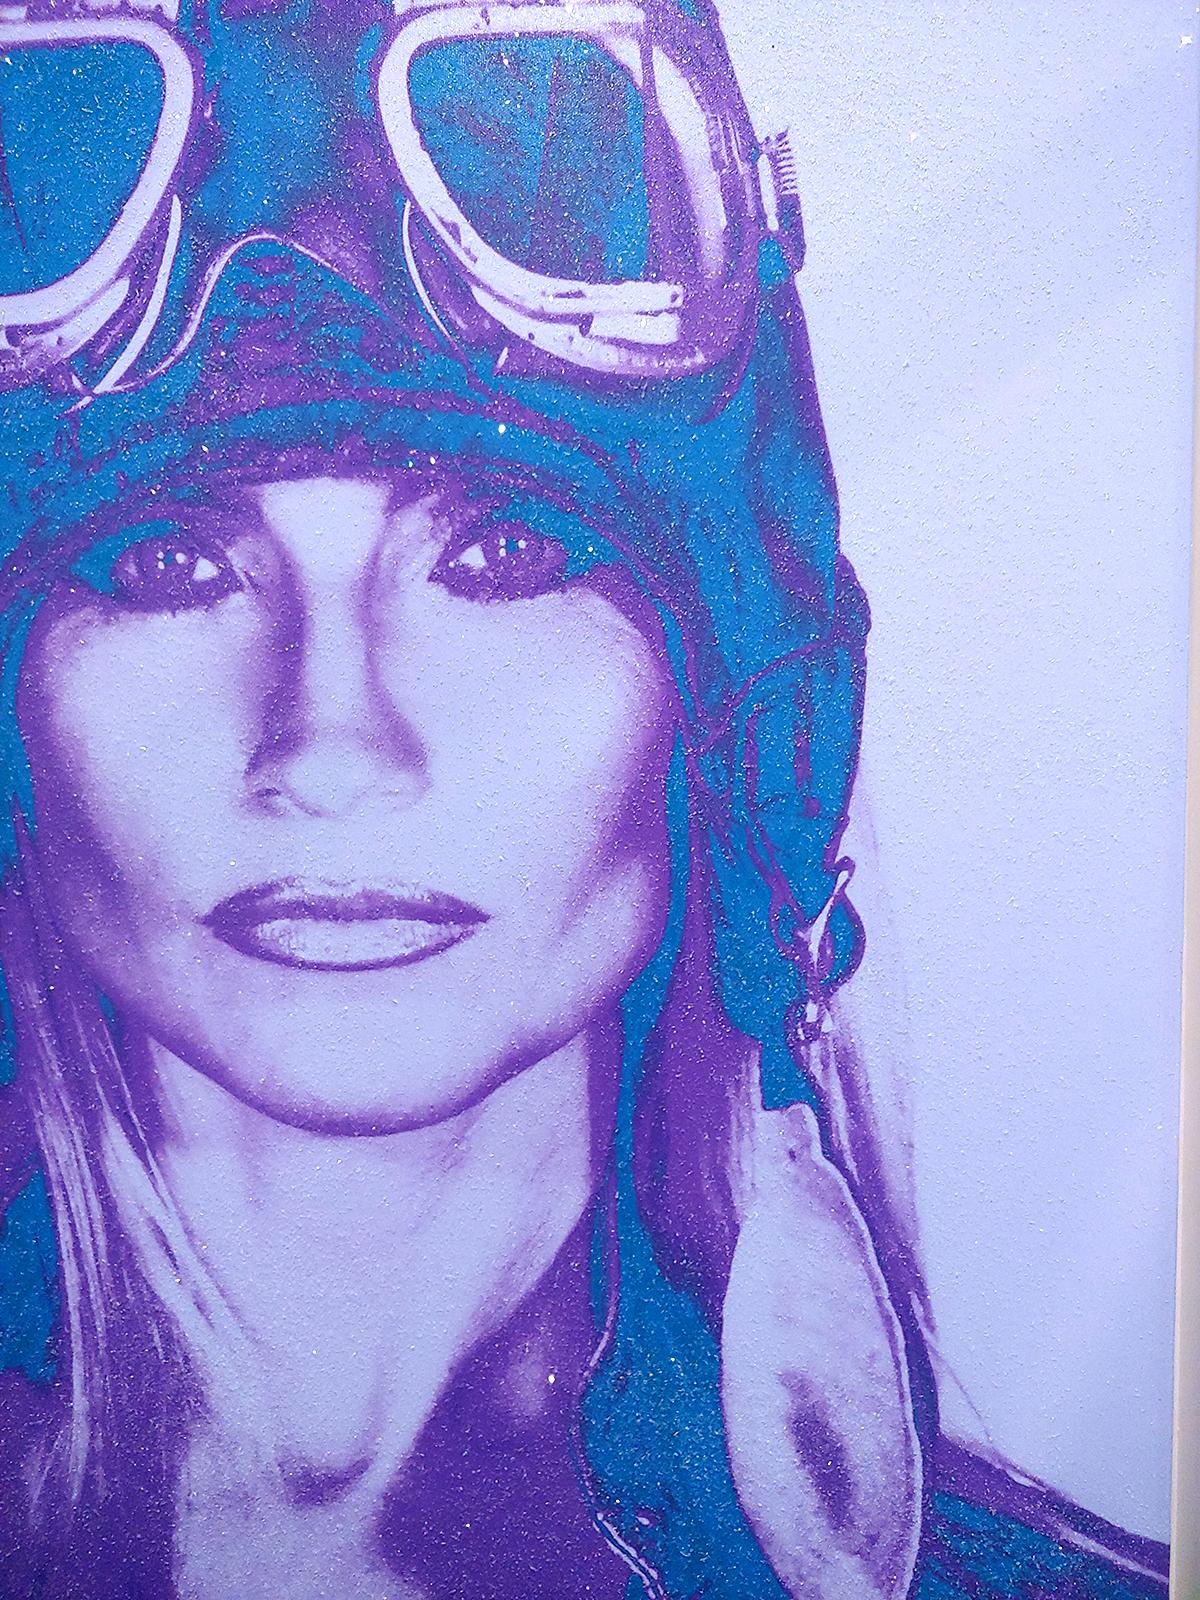 THE AVIATRIX ....lavender and Blue Diamond Dust on canvas - Painting by Ceravolo